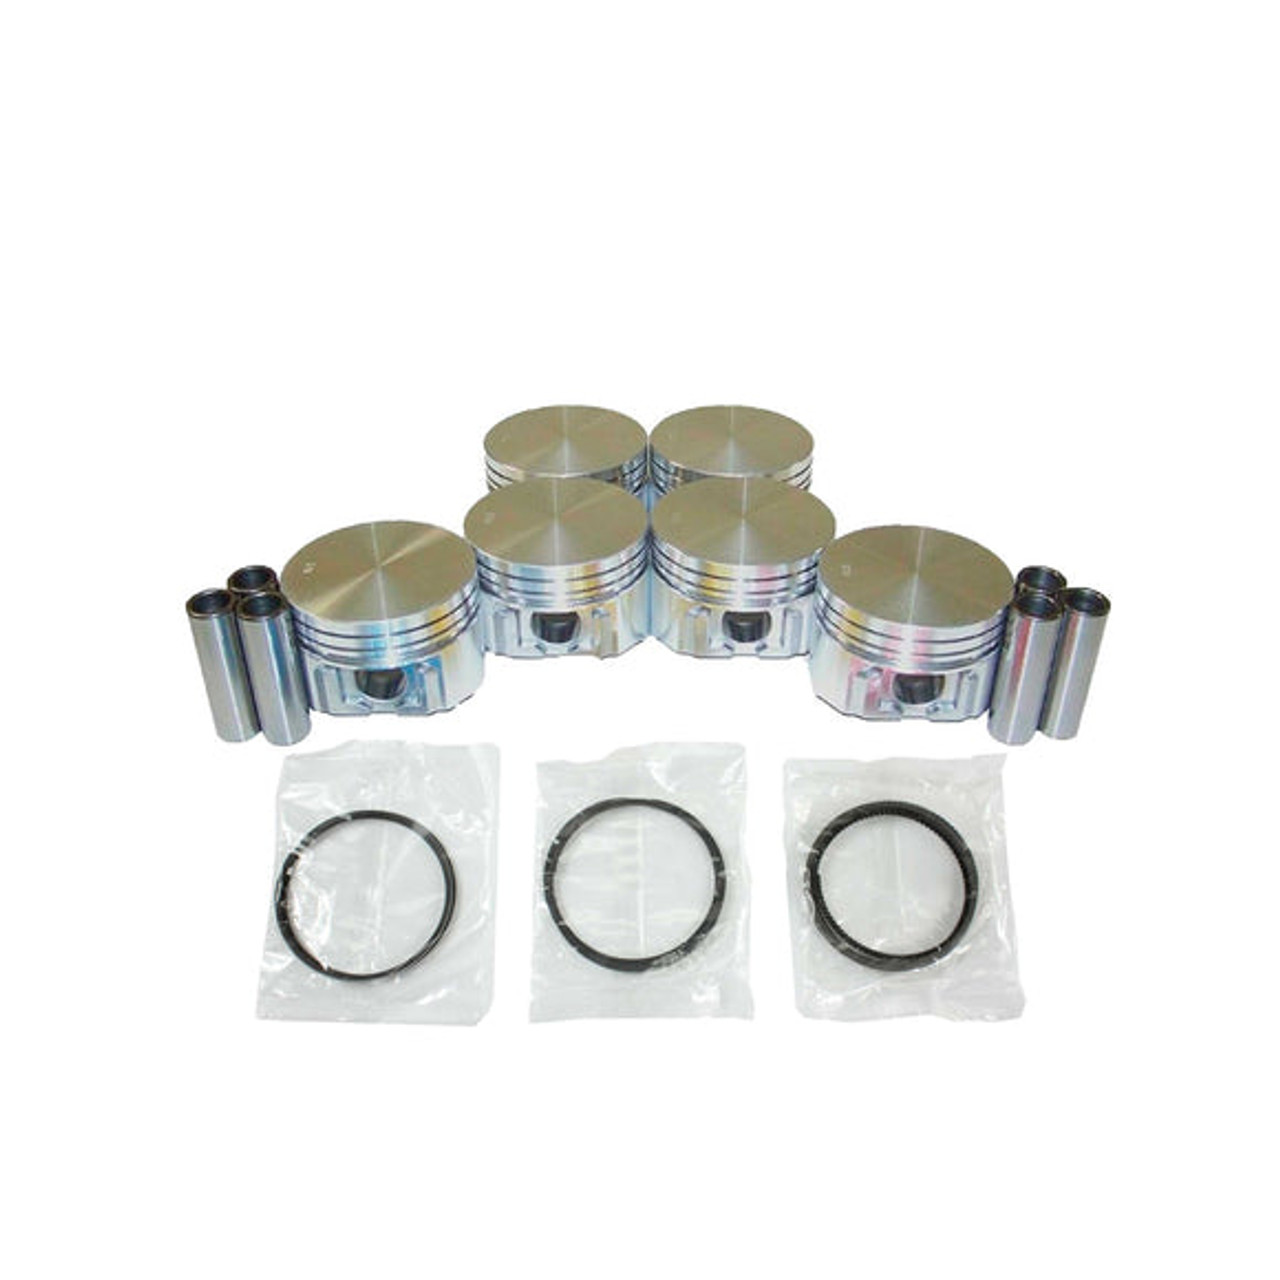 Piston Set with Rings - 1994 Ford Ranger 3.0L Engine Parts # PRK4137ZE23